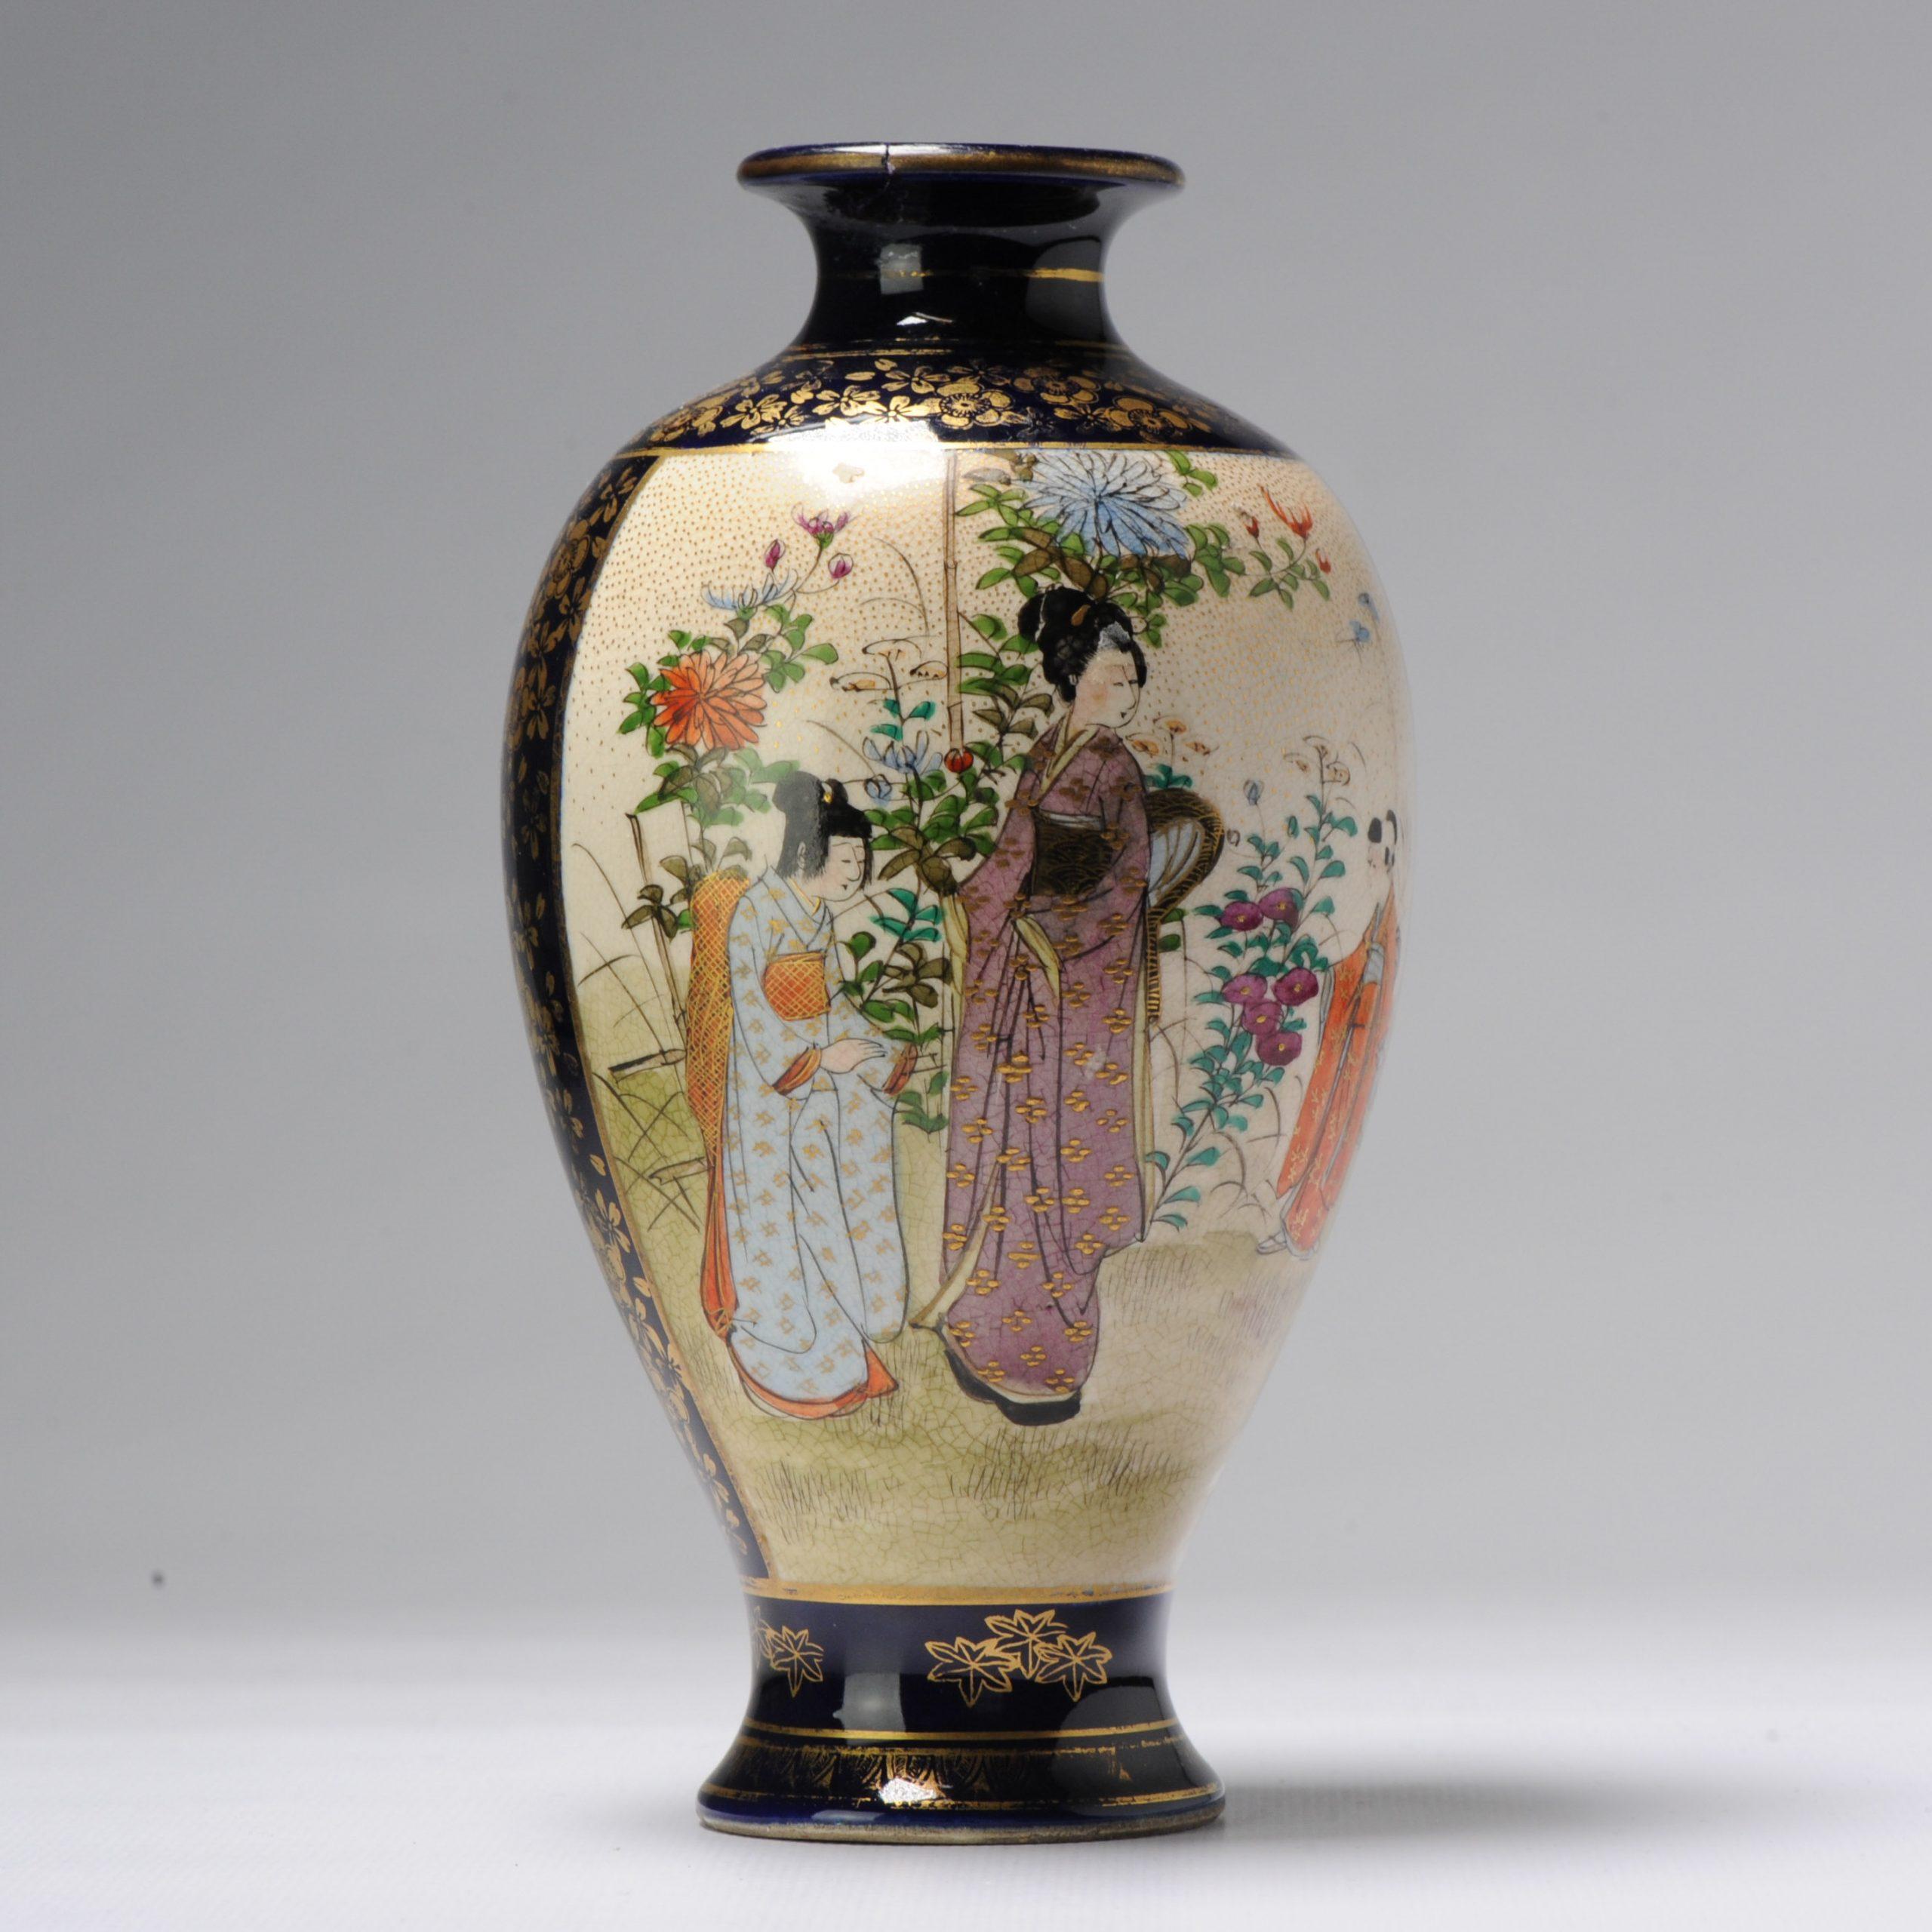 Description
A Japanese Satsuma vase and cover marked base

Condition
Overall Condition: 1 restuck chip to rim. Size 190mm high

Period
19th century Meiji Periode (1867-1912).